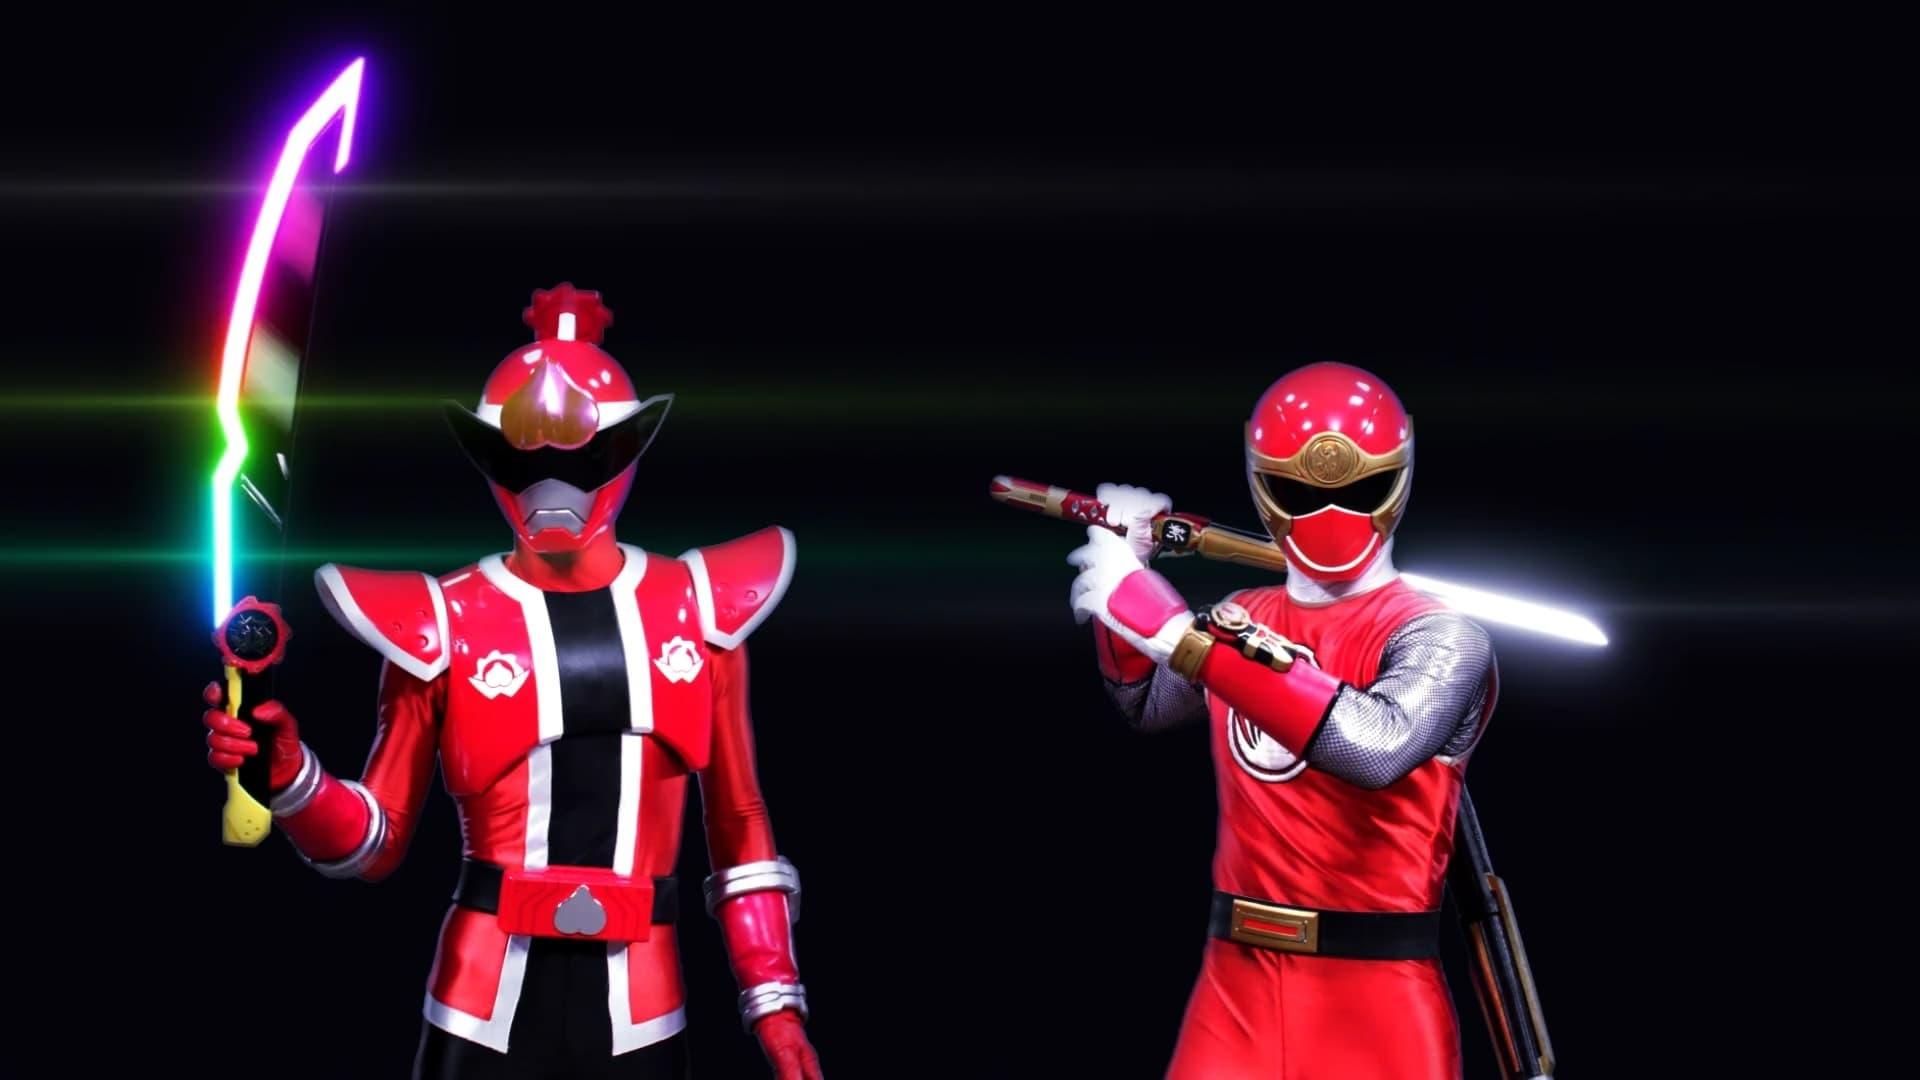 Ninpuu Sentai Hurricaneger with Donbrothers backdrop